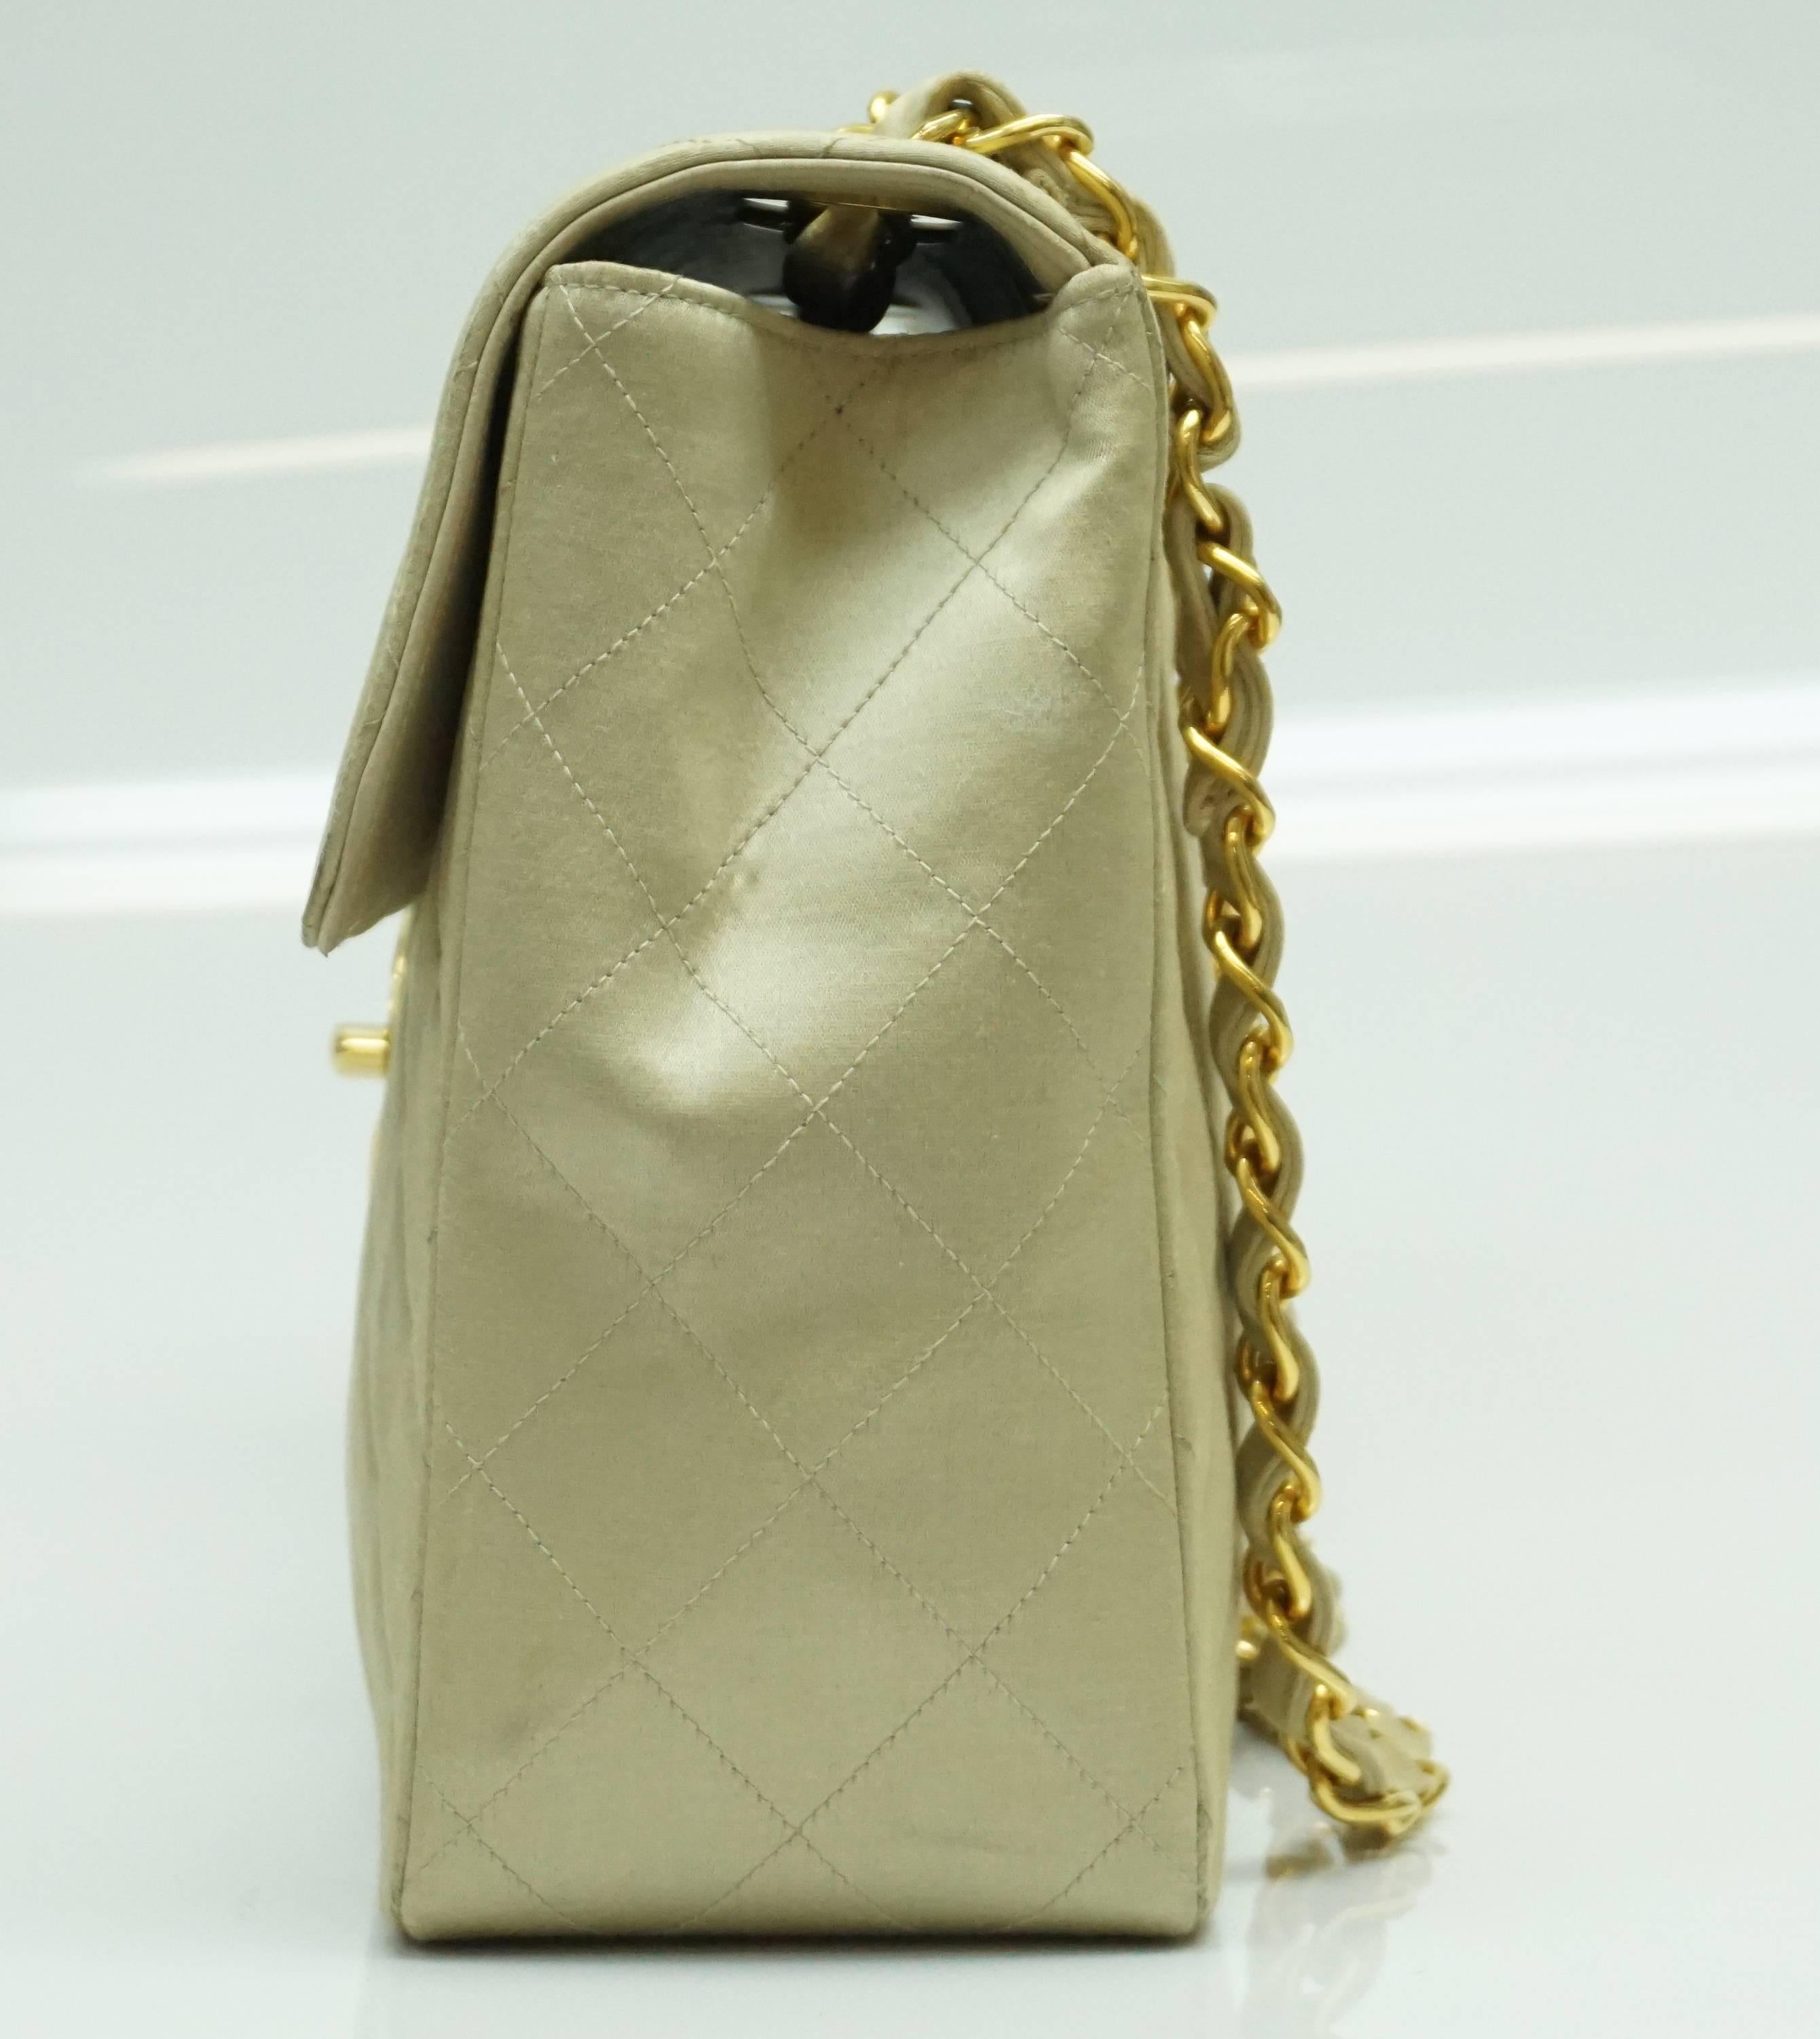 Chanel Gold Fabric Maxi Single Flap Handbag - GHW - Early 90's  This classic chanel handbag is in a very unique light gold fabric. The inside is fully leather. It has gold hardware. It has a minor chip/peel area in the CC and therefore we priced it